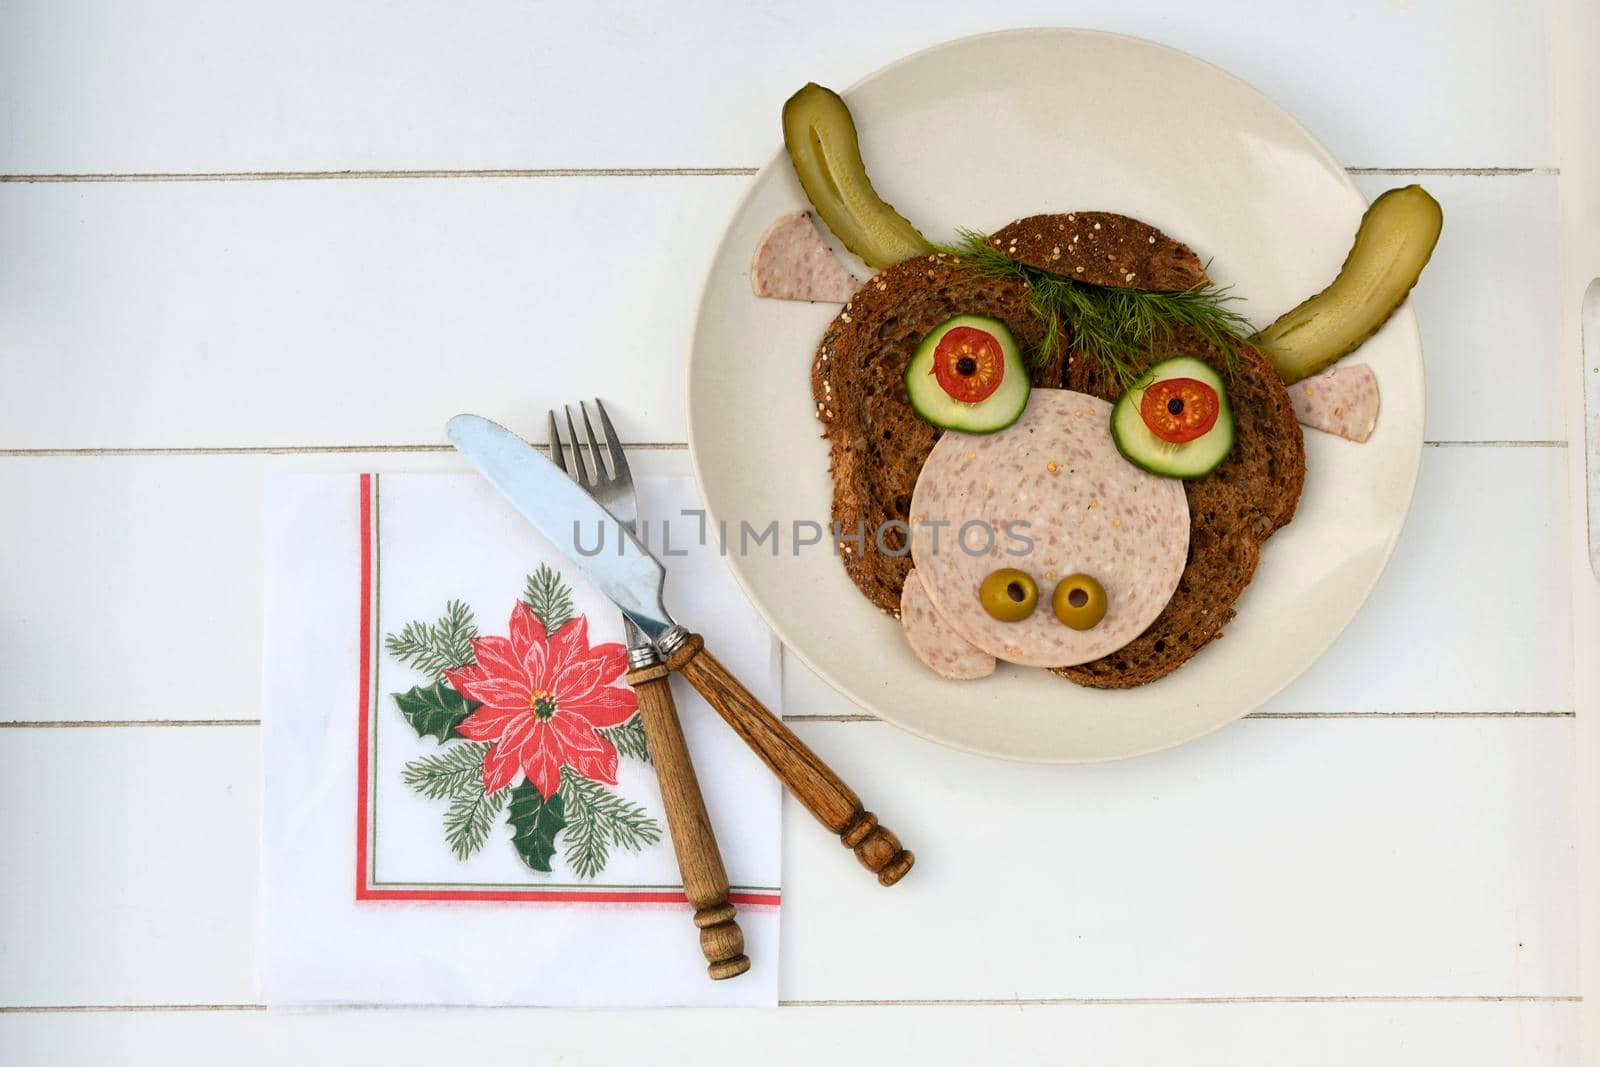 Sandwich iof a cheerful bull made of dark bread, sausages and vegetables by KaterinaDalemans